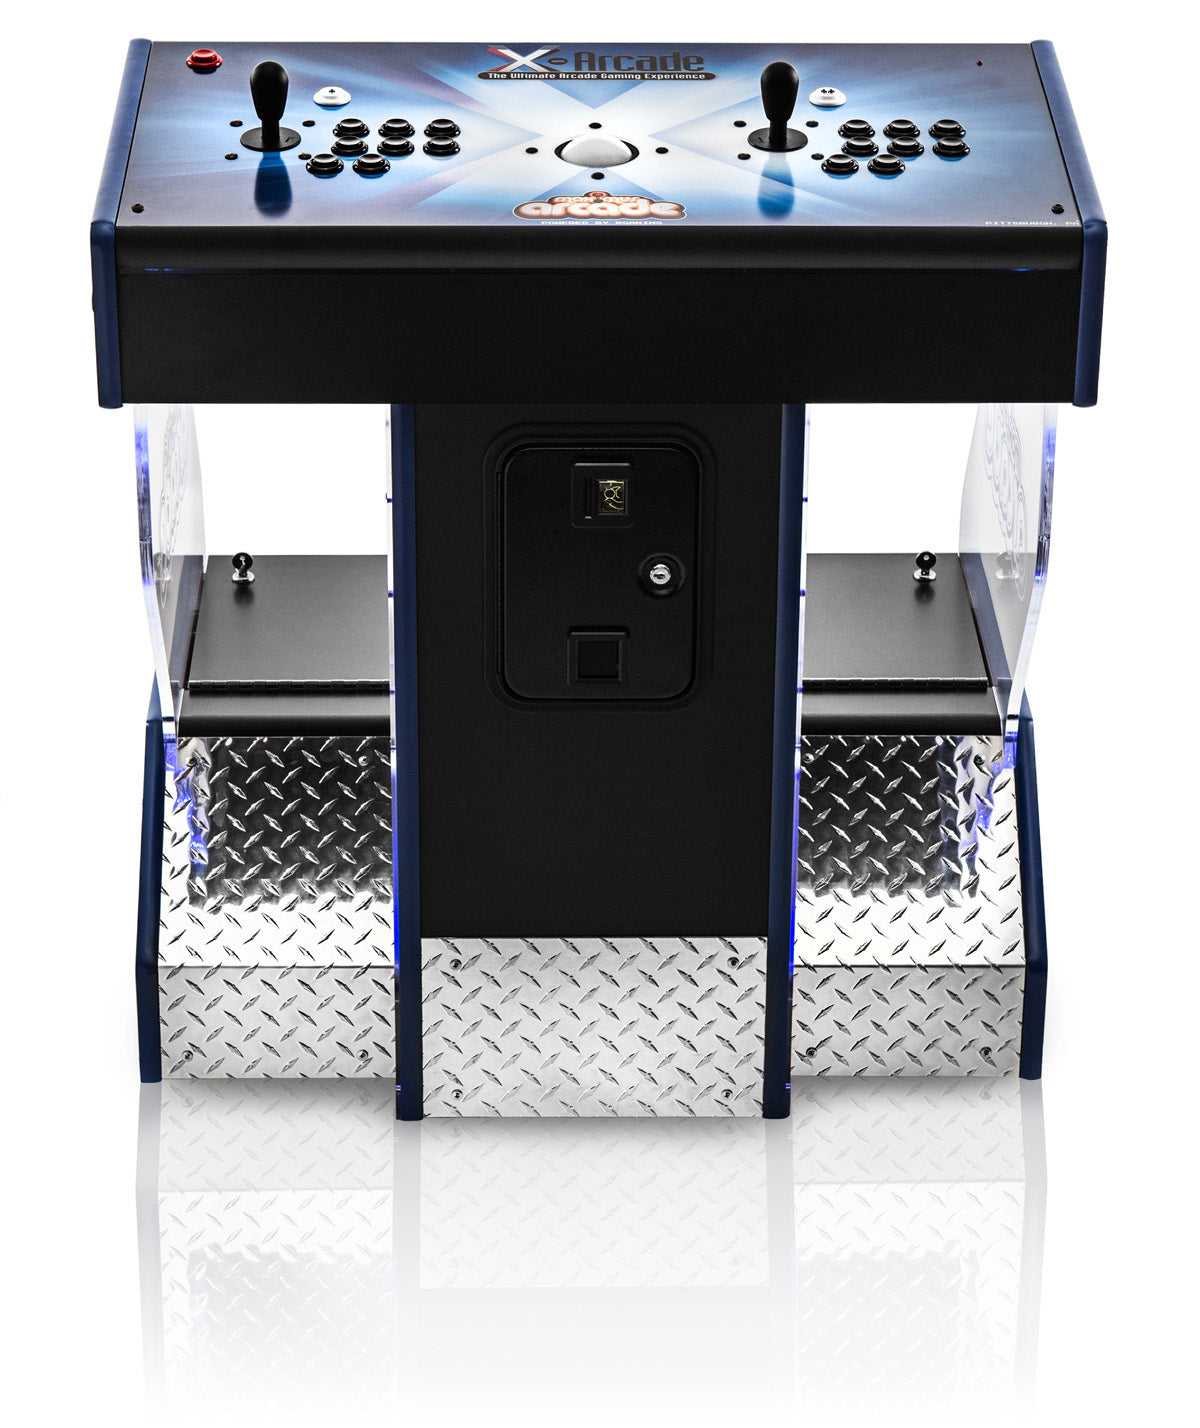 Arcade Controllers Xgaming Arcade Game X-Arcade Indestructible Cabinets and Machine